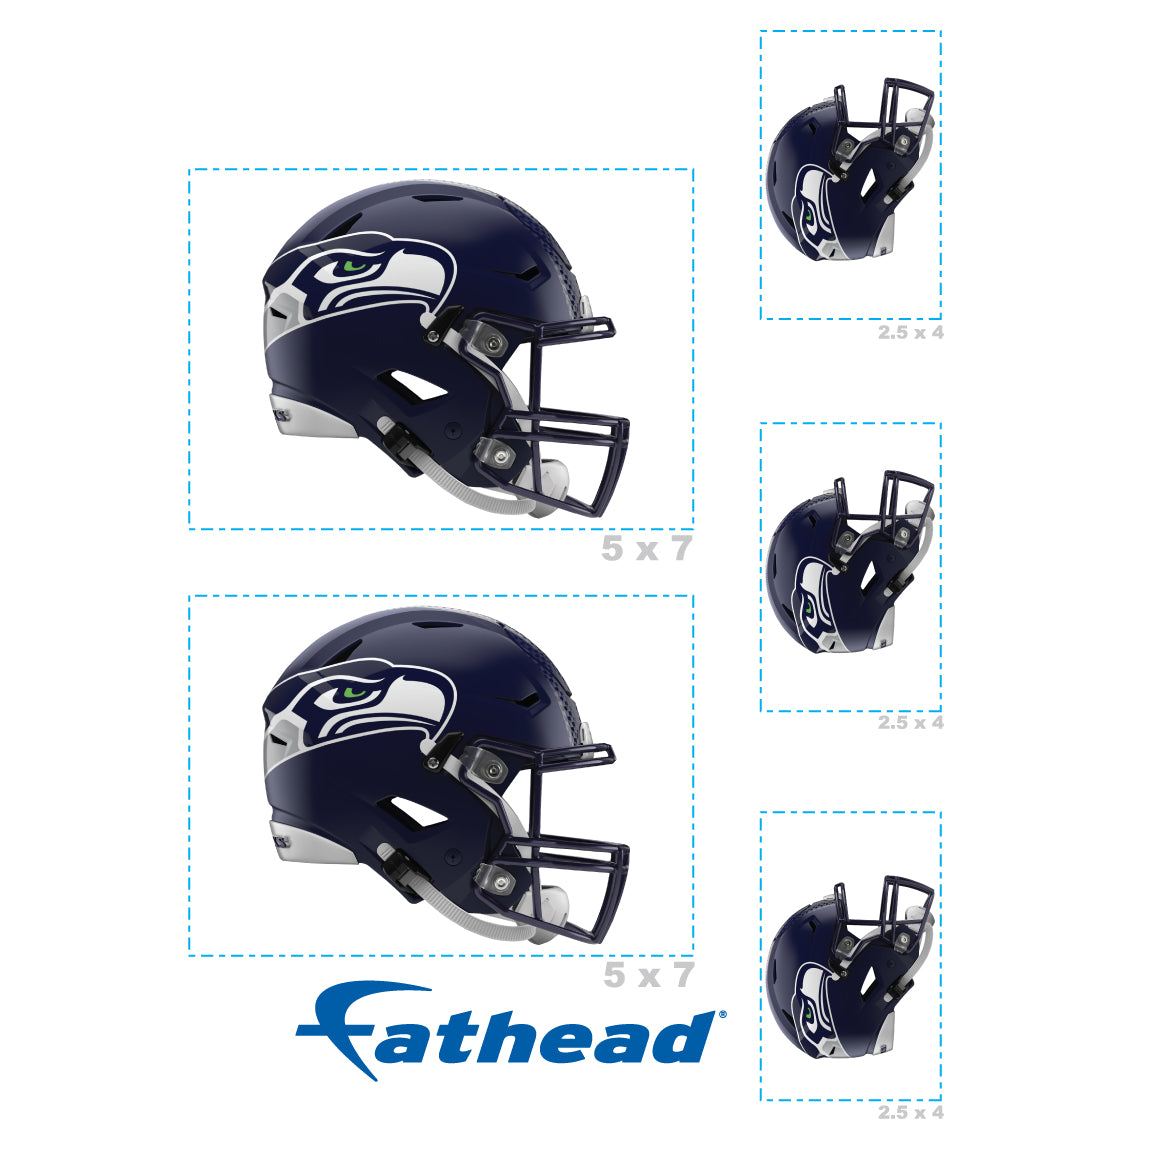 Seattle Seahawks: Helmet Minis - Officially Licensed NFL Removable Adhesive Decal